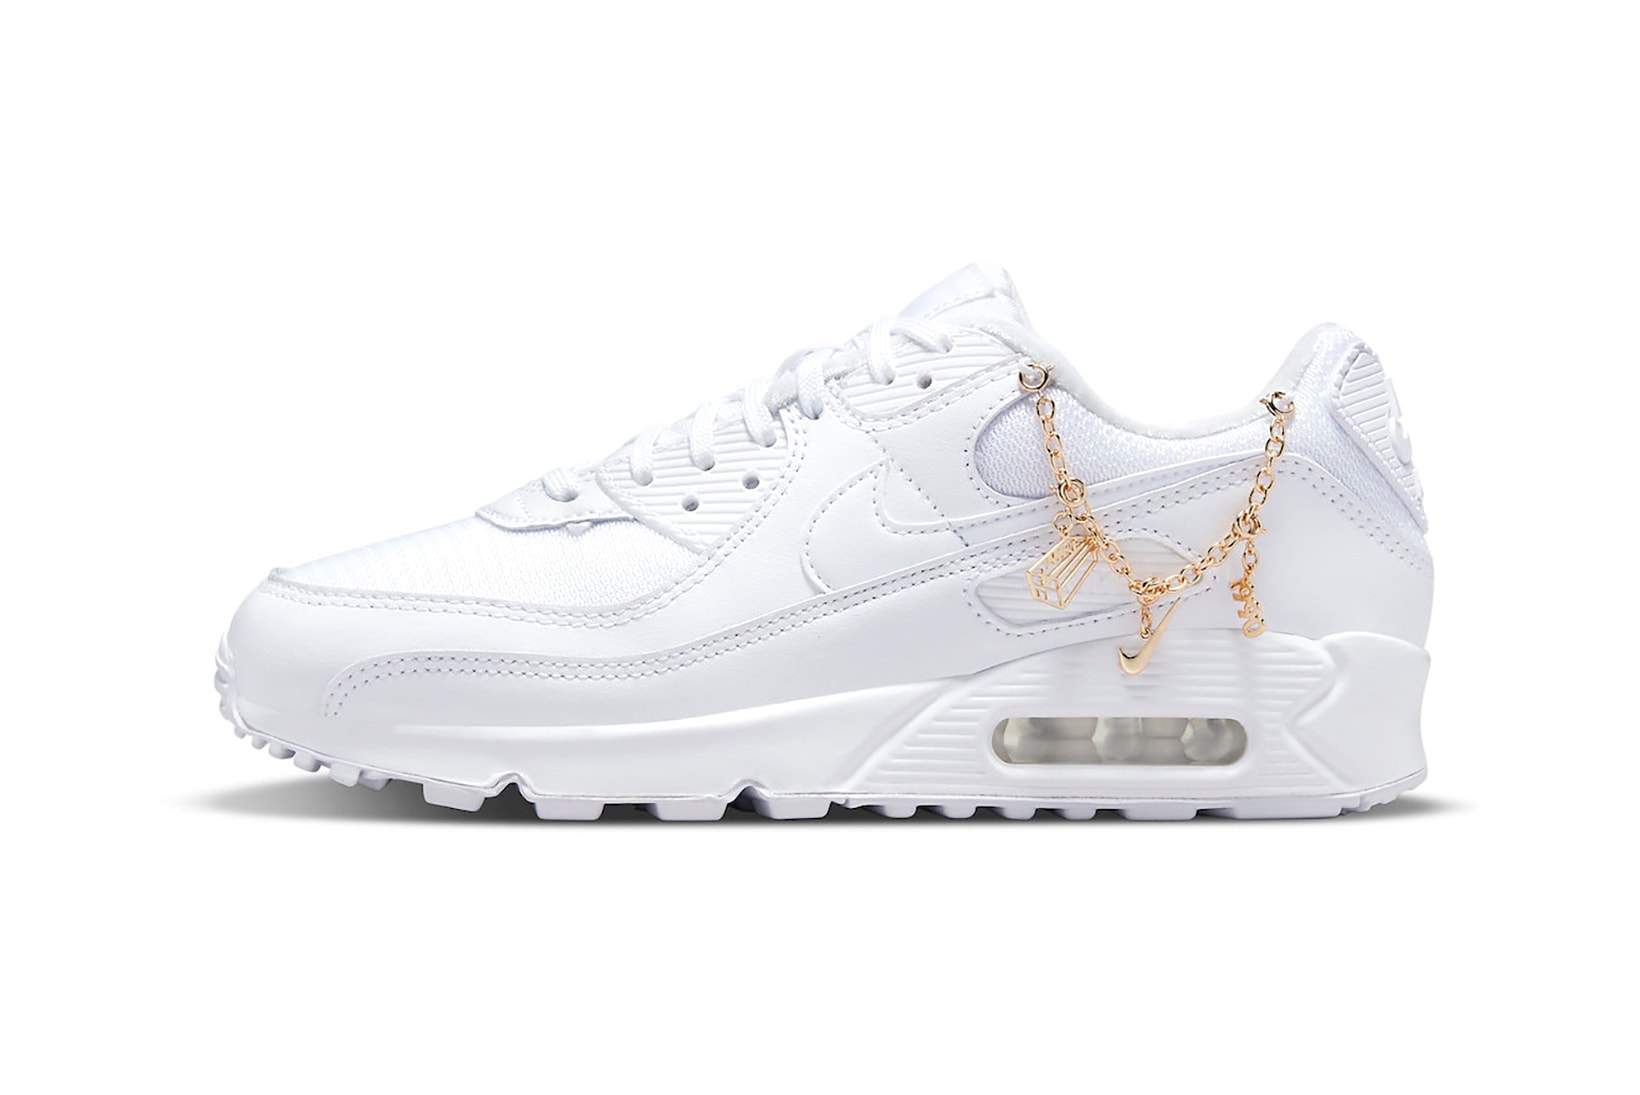 Nike Air Max 90 AM90 Lucky Charms White Gold Sneakers Footwear Kicks Shoes Lateral